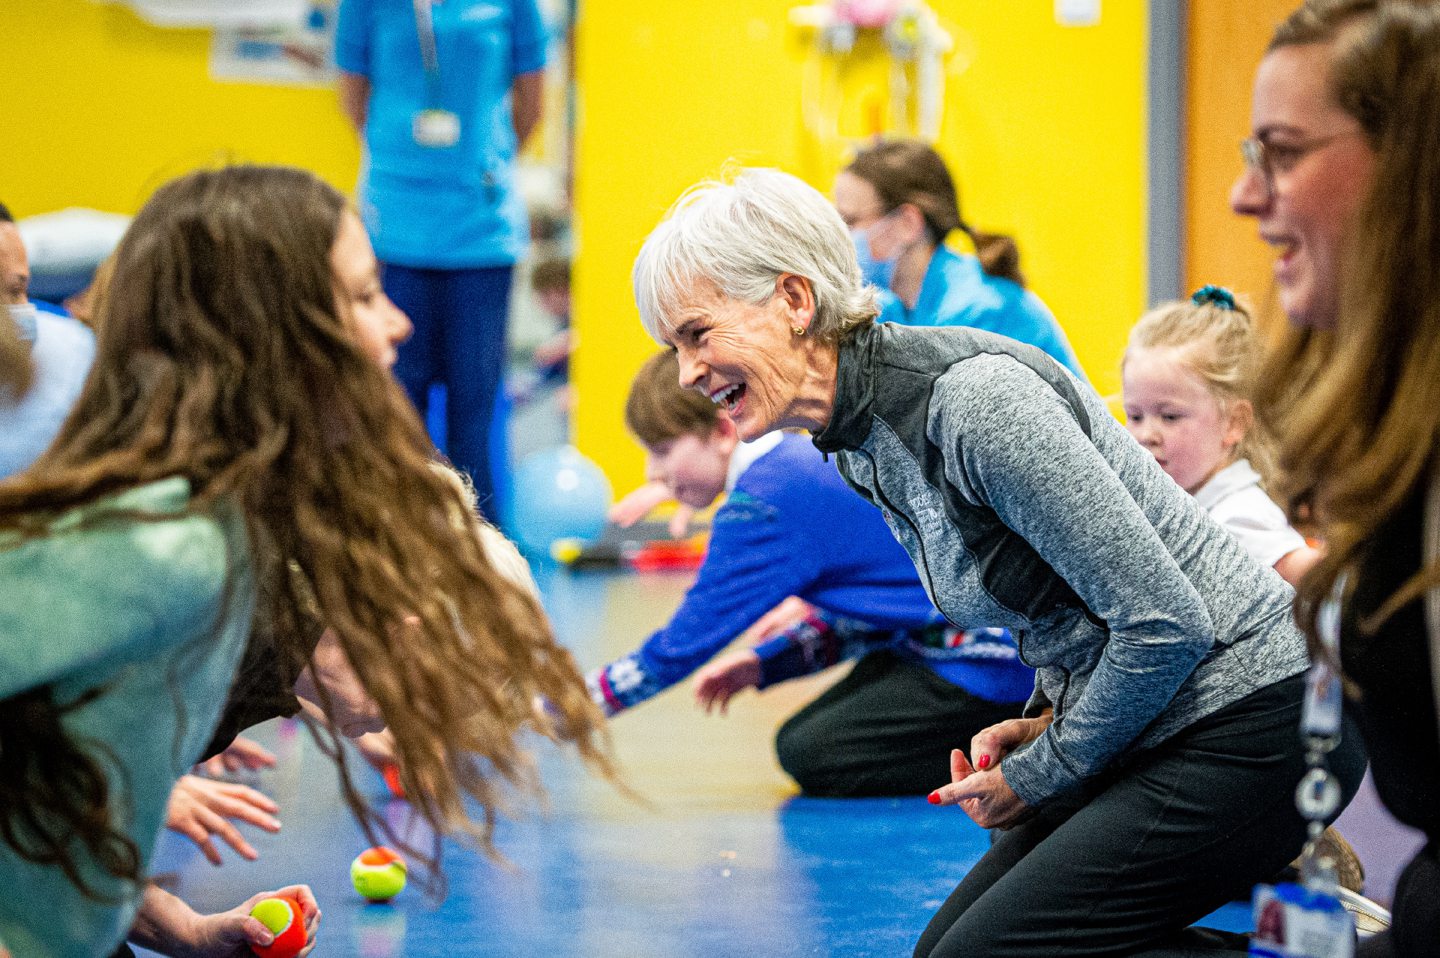 Youngsters and staff had a ball during the session. Image: Wullie Marr / DC Thomson